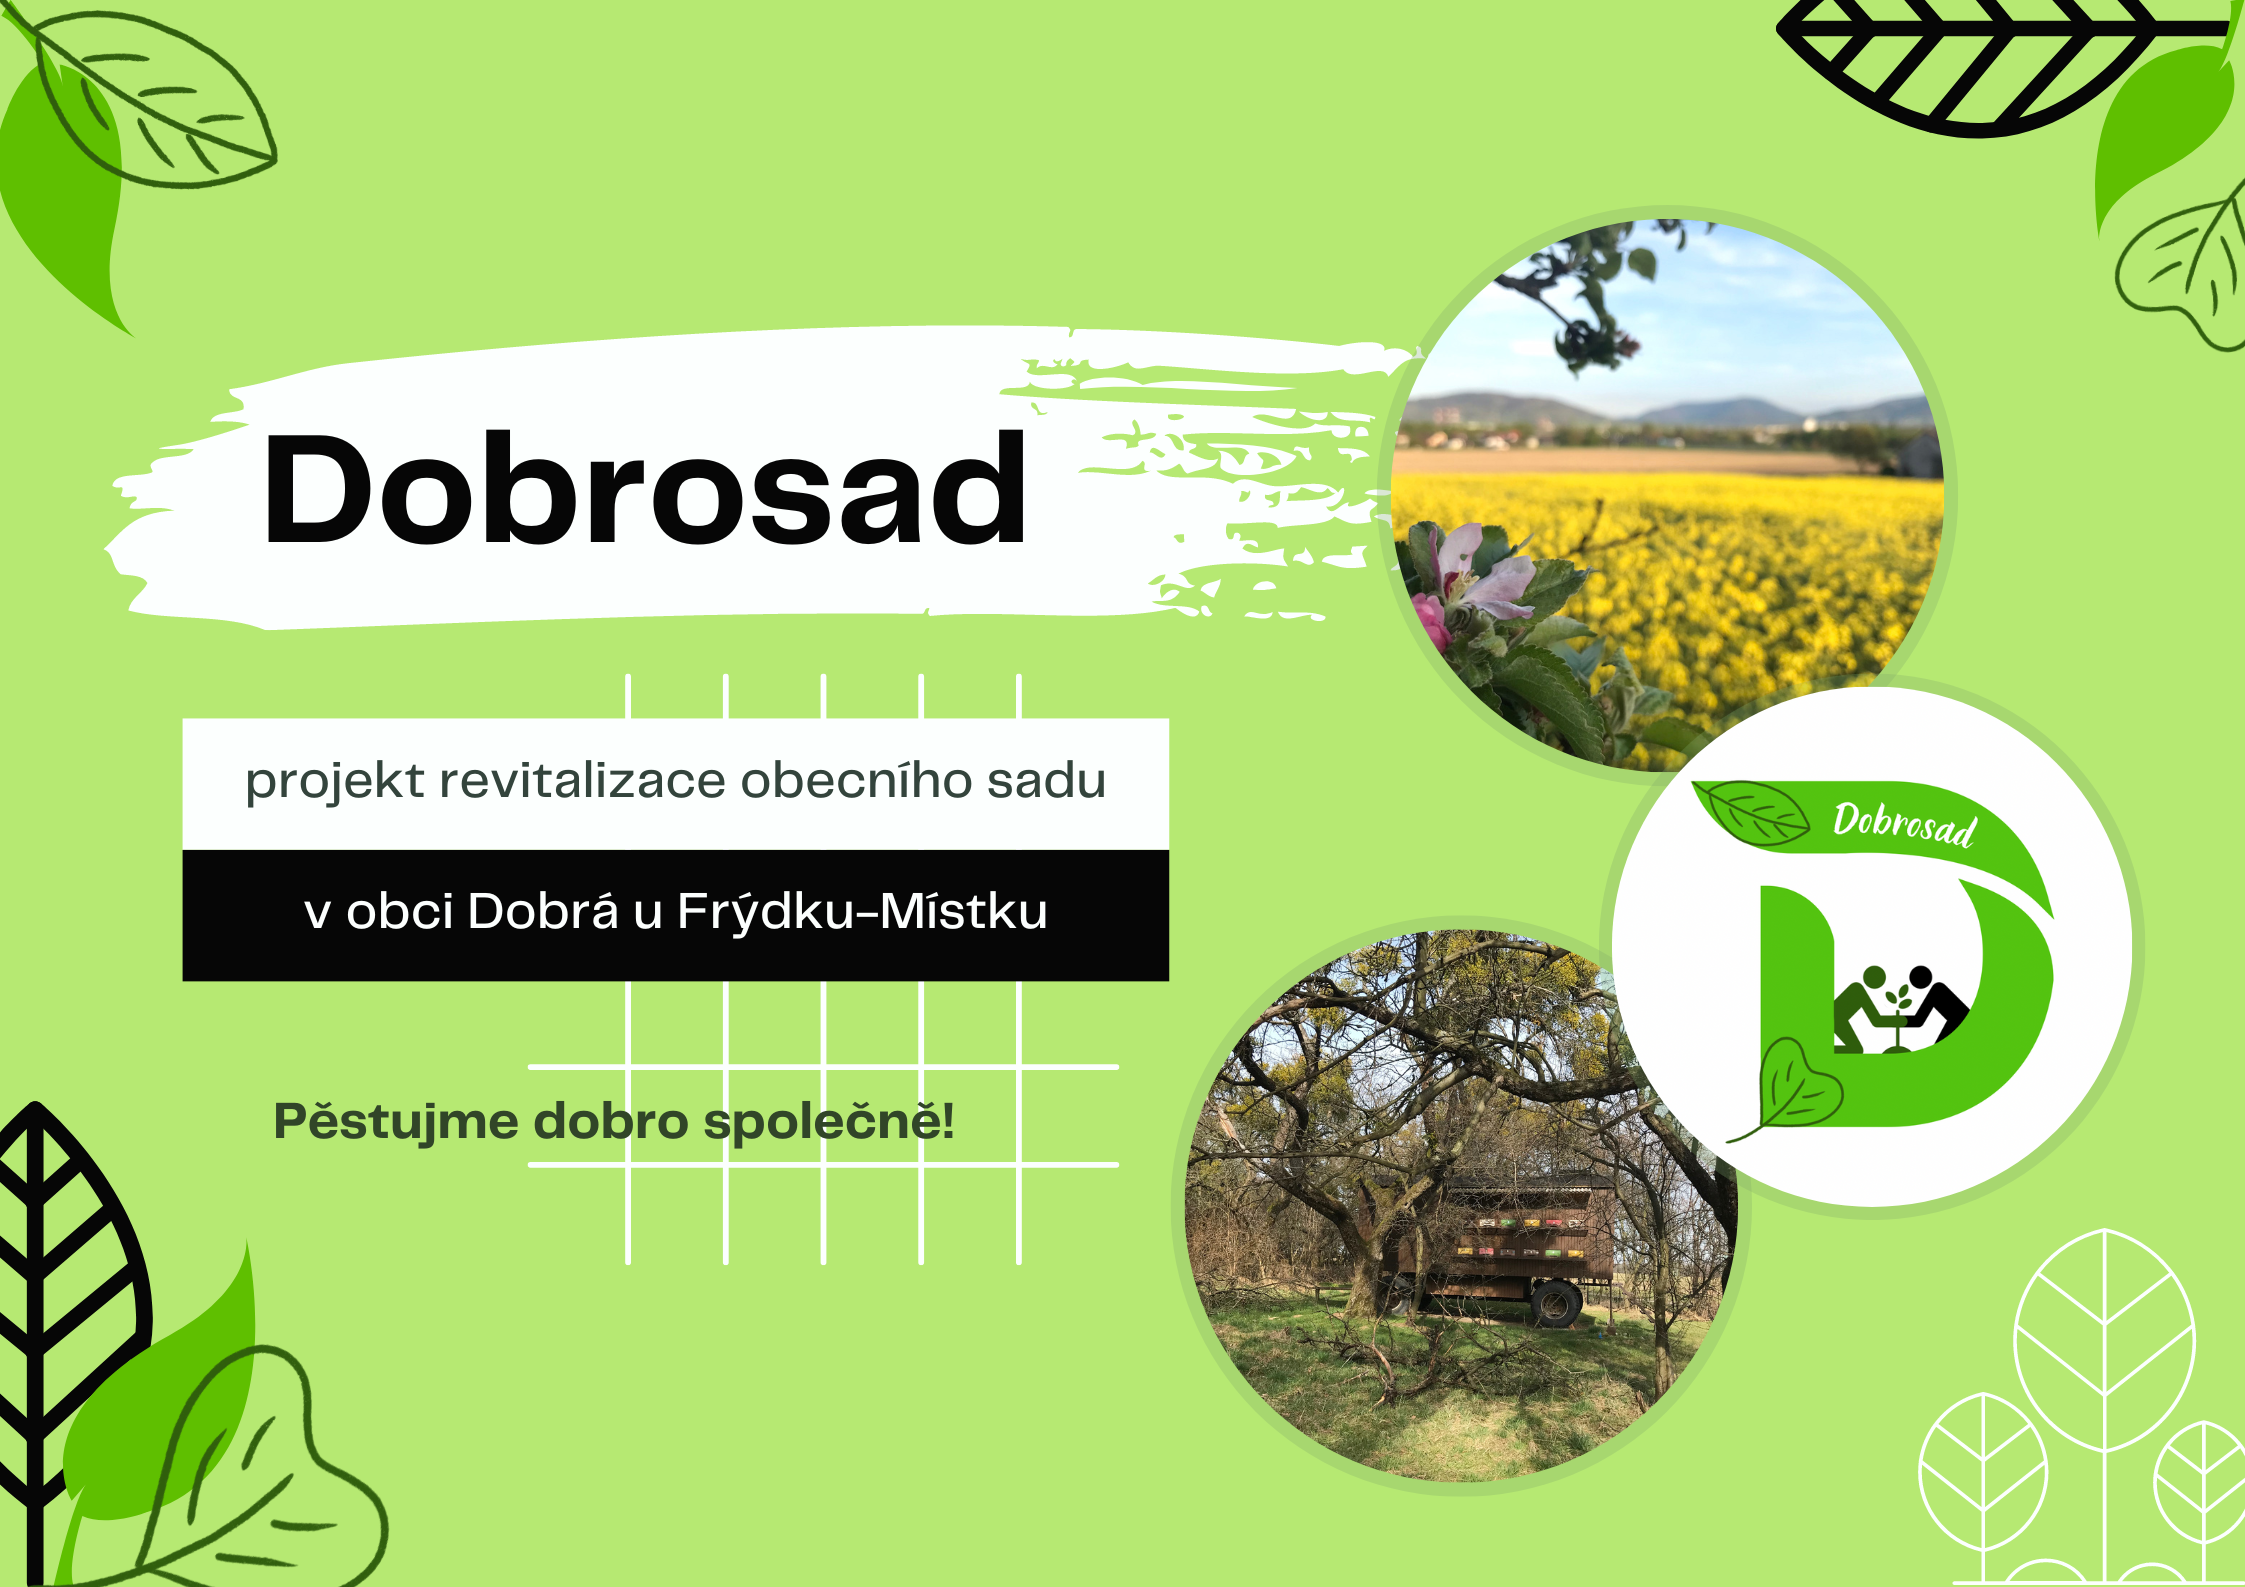 Featured image for “Dobrosad”